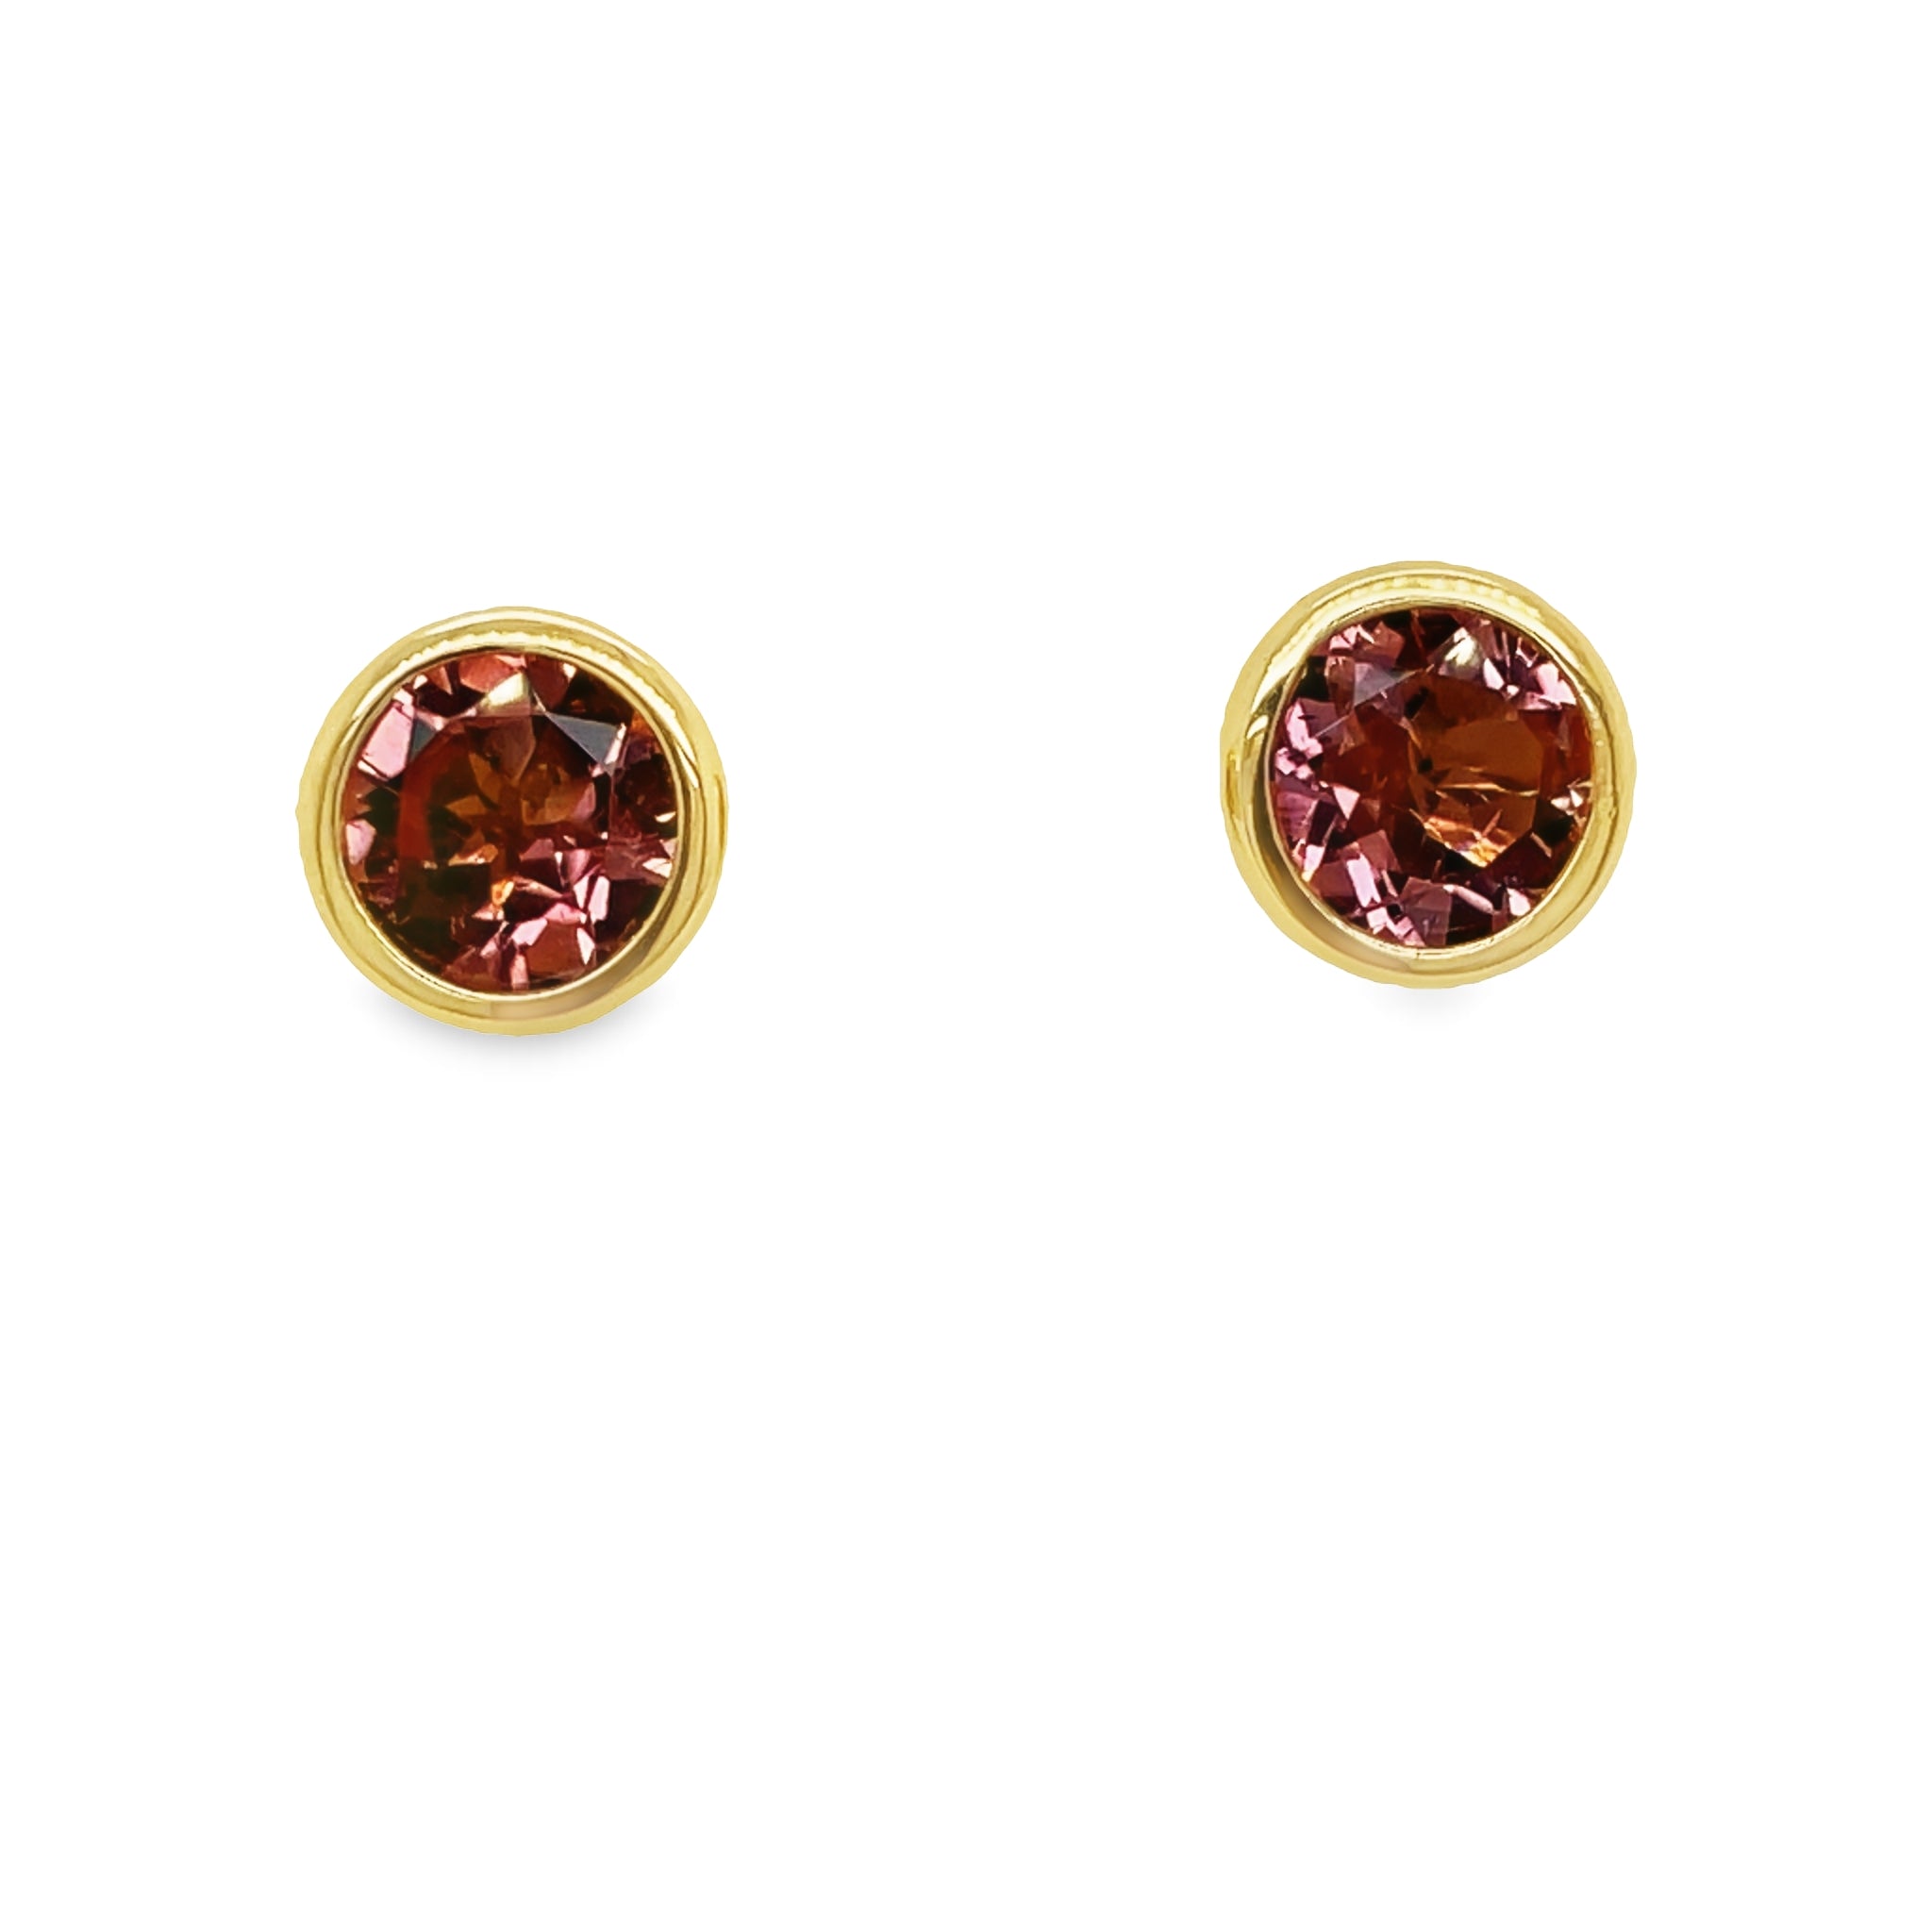 Beautifully crafted in 18k yellow gold, these citrine stud earrings will add a luxurious sparkle to any outfit. The large round pink tourmaline are secured with friction backs, ensuring a secure fit that will make you feel confident. Make a bold and sophisticated statement with these stunning earrings!